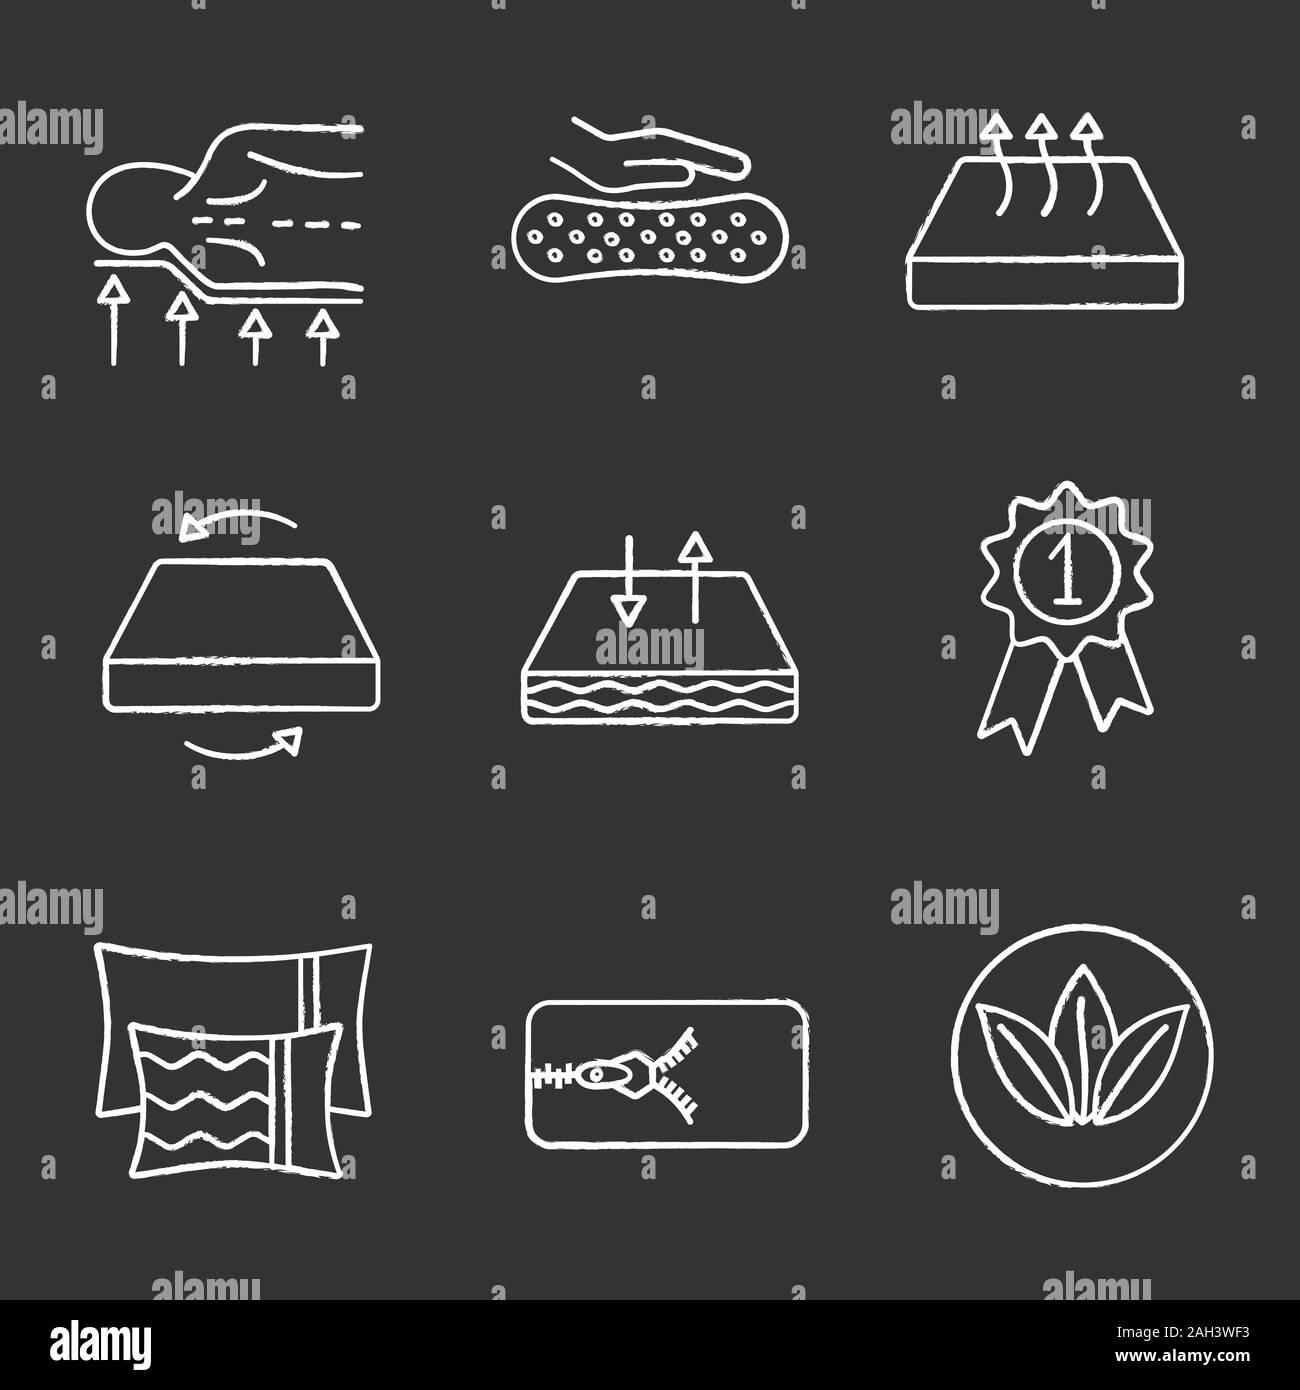 Mattress chalk icons set. Orthopedic, latex, breathable, dual season, ecological mattress with removable cover, pillows and award medal. Isolated vect Stock Vector